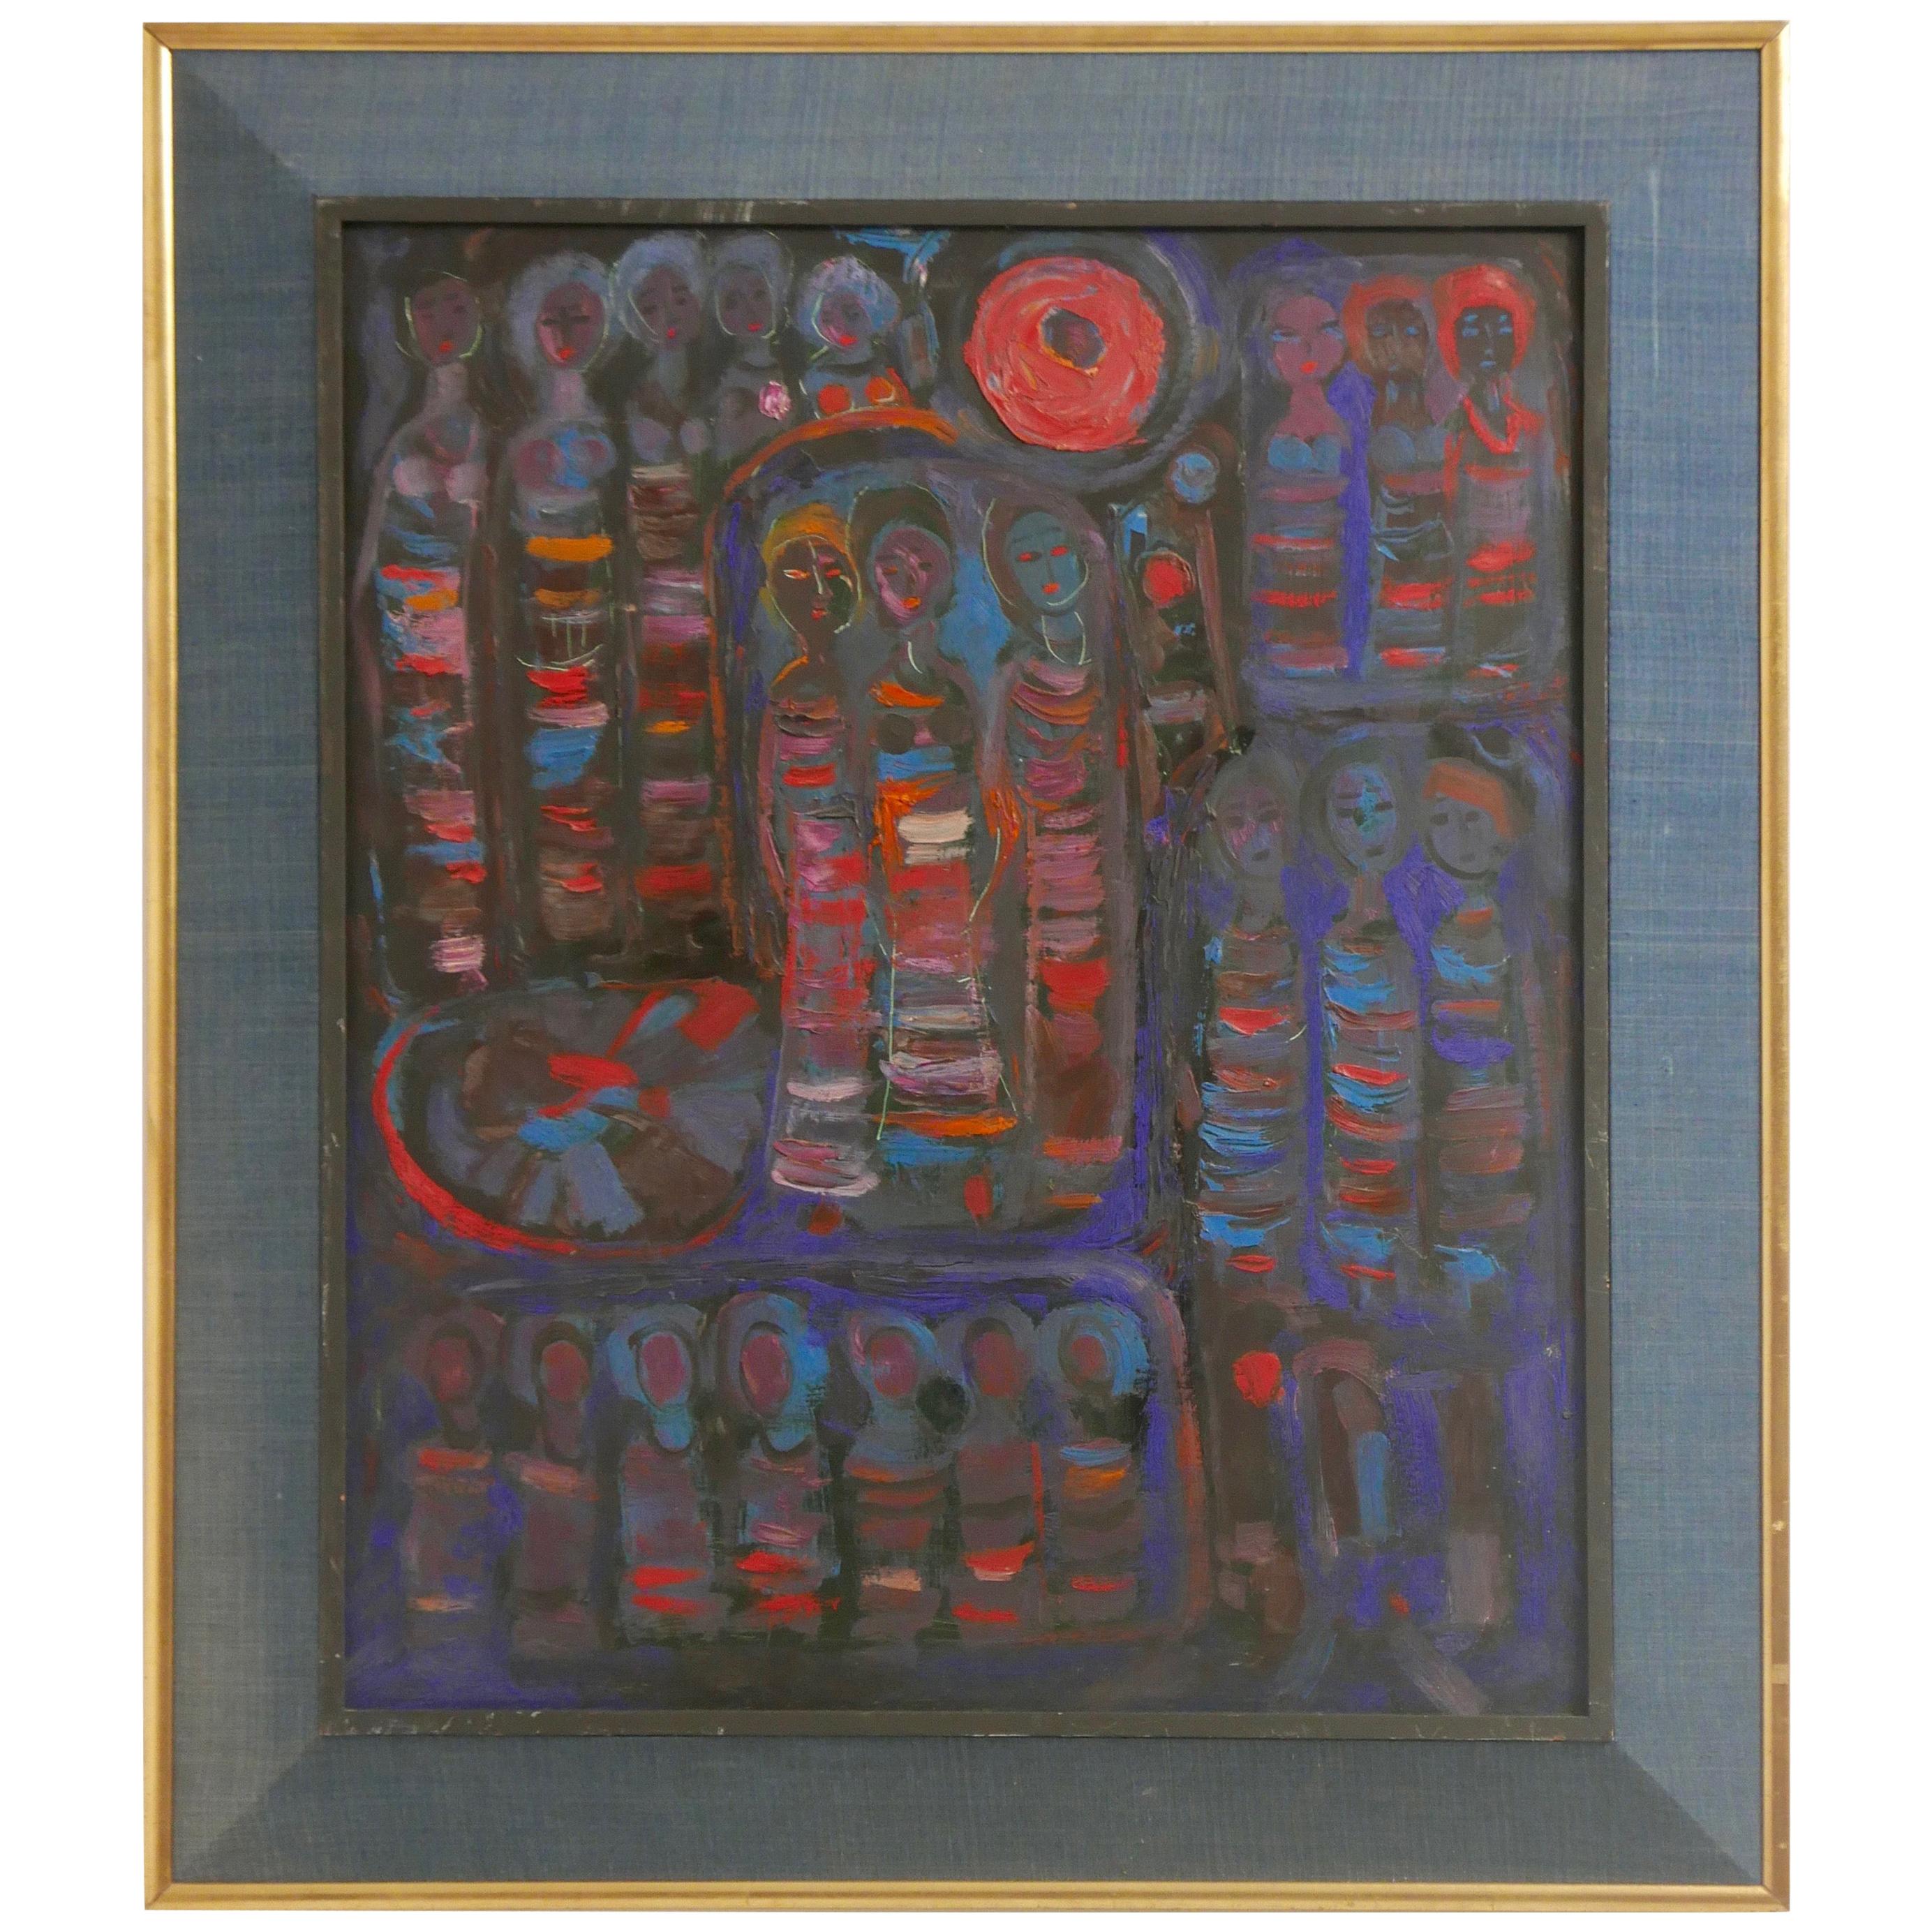 American Midcentury Abstract Modernist Painting with Figures